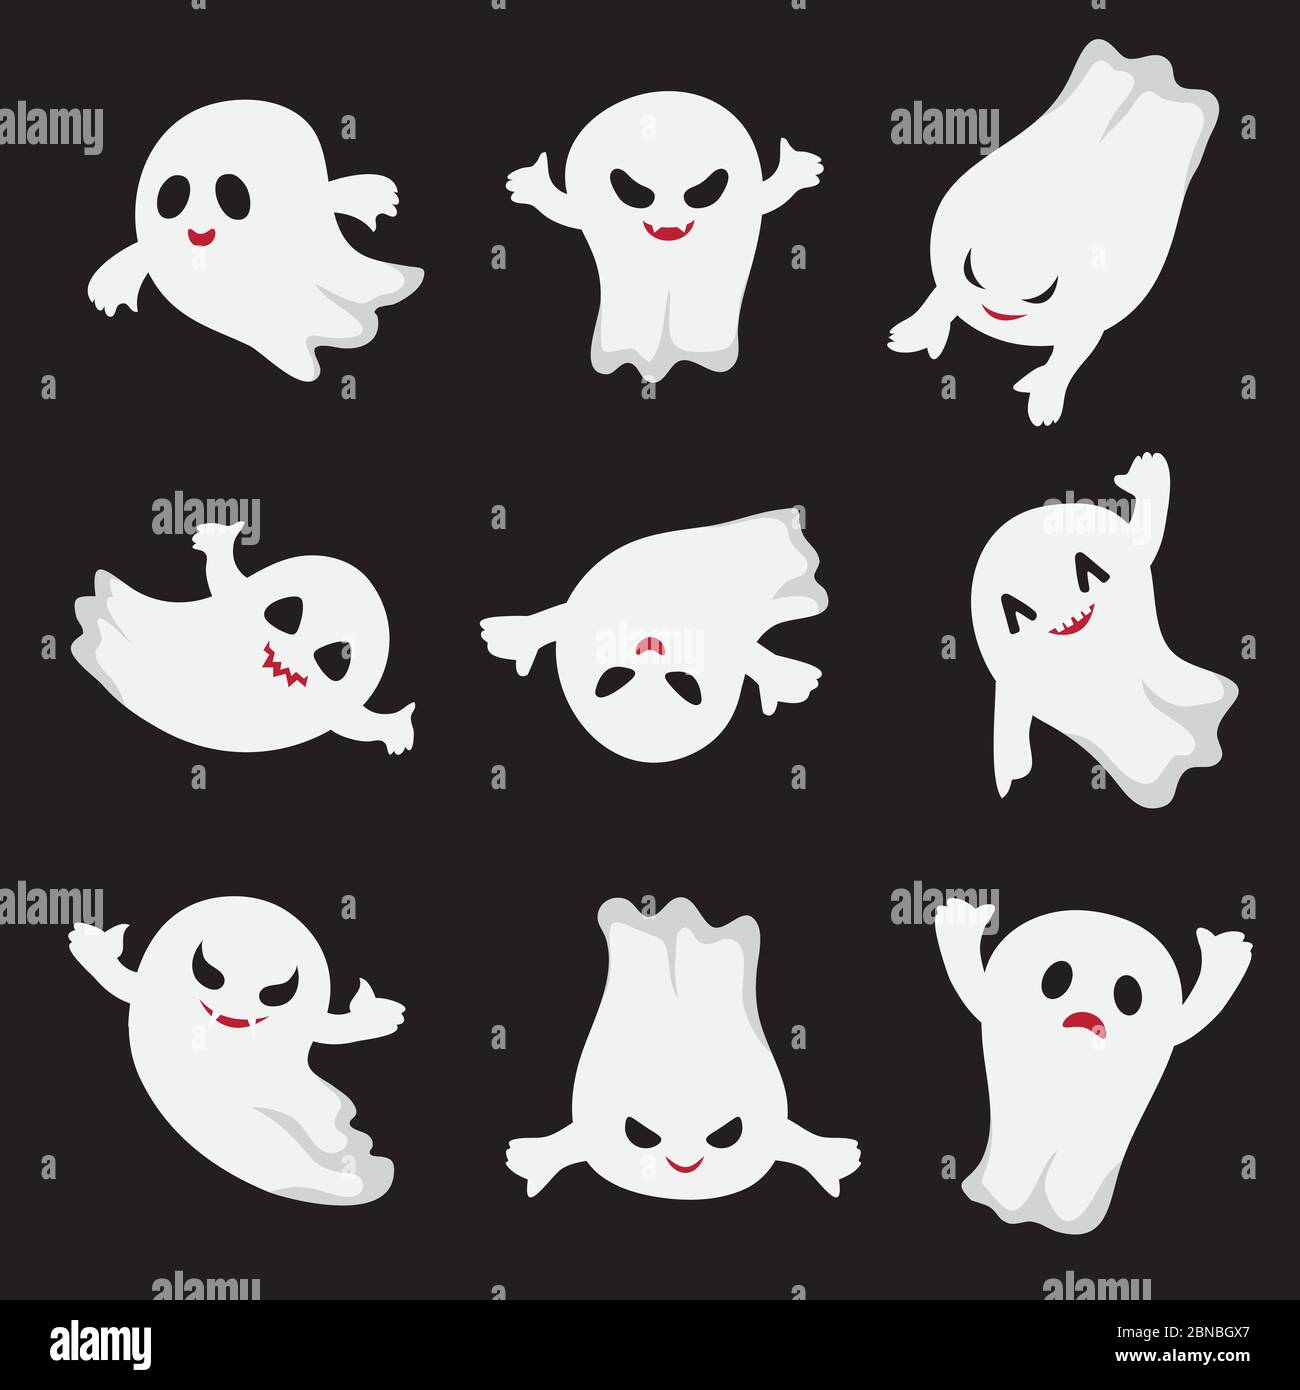 Halloween ghost. Ghostly cute cartoon characters. Devil monsters for frightened child. Vector collection spooky evil, scary ghost, horror ghostly illustration Stock Vector